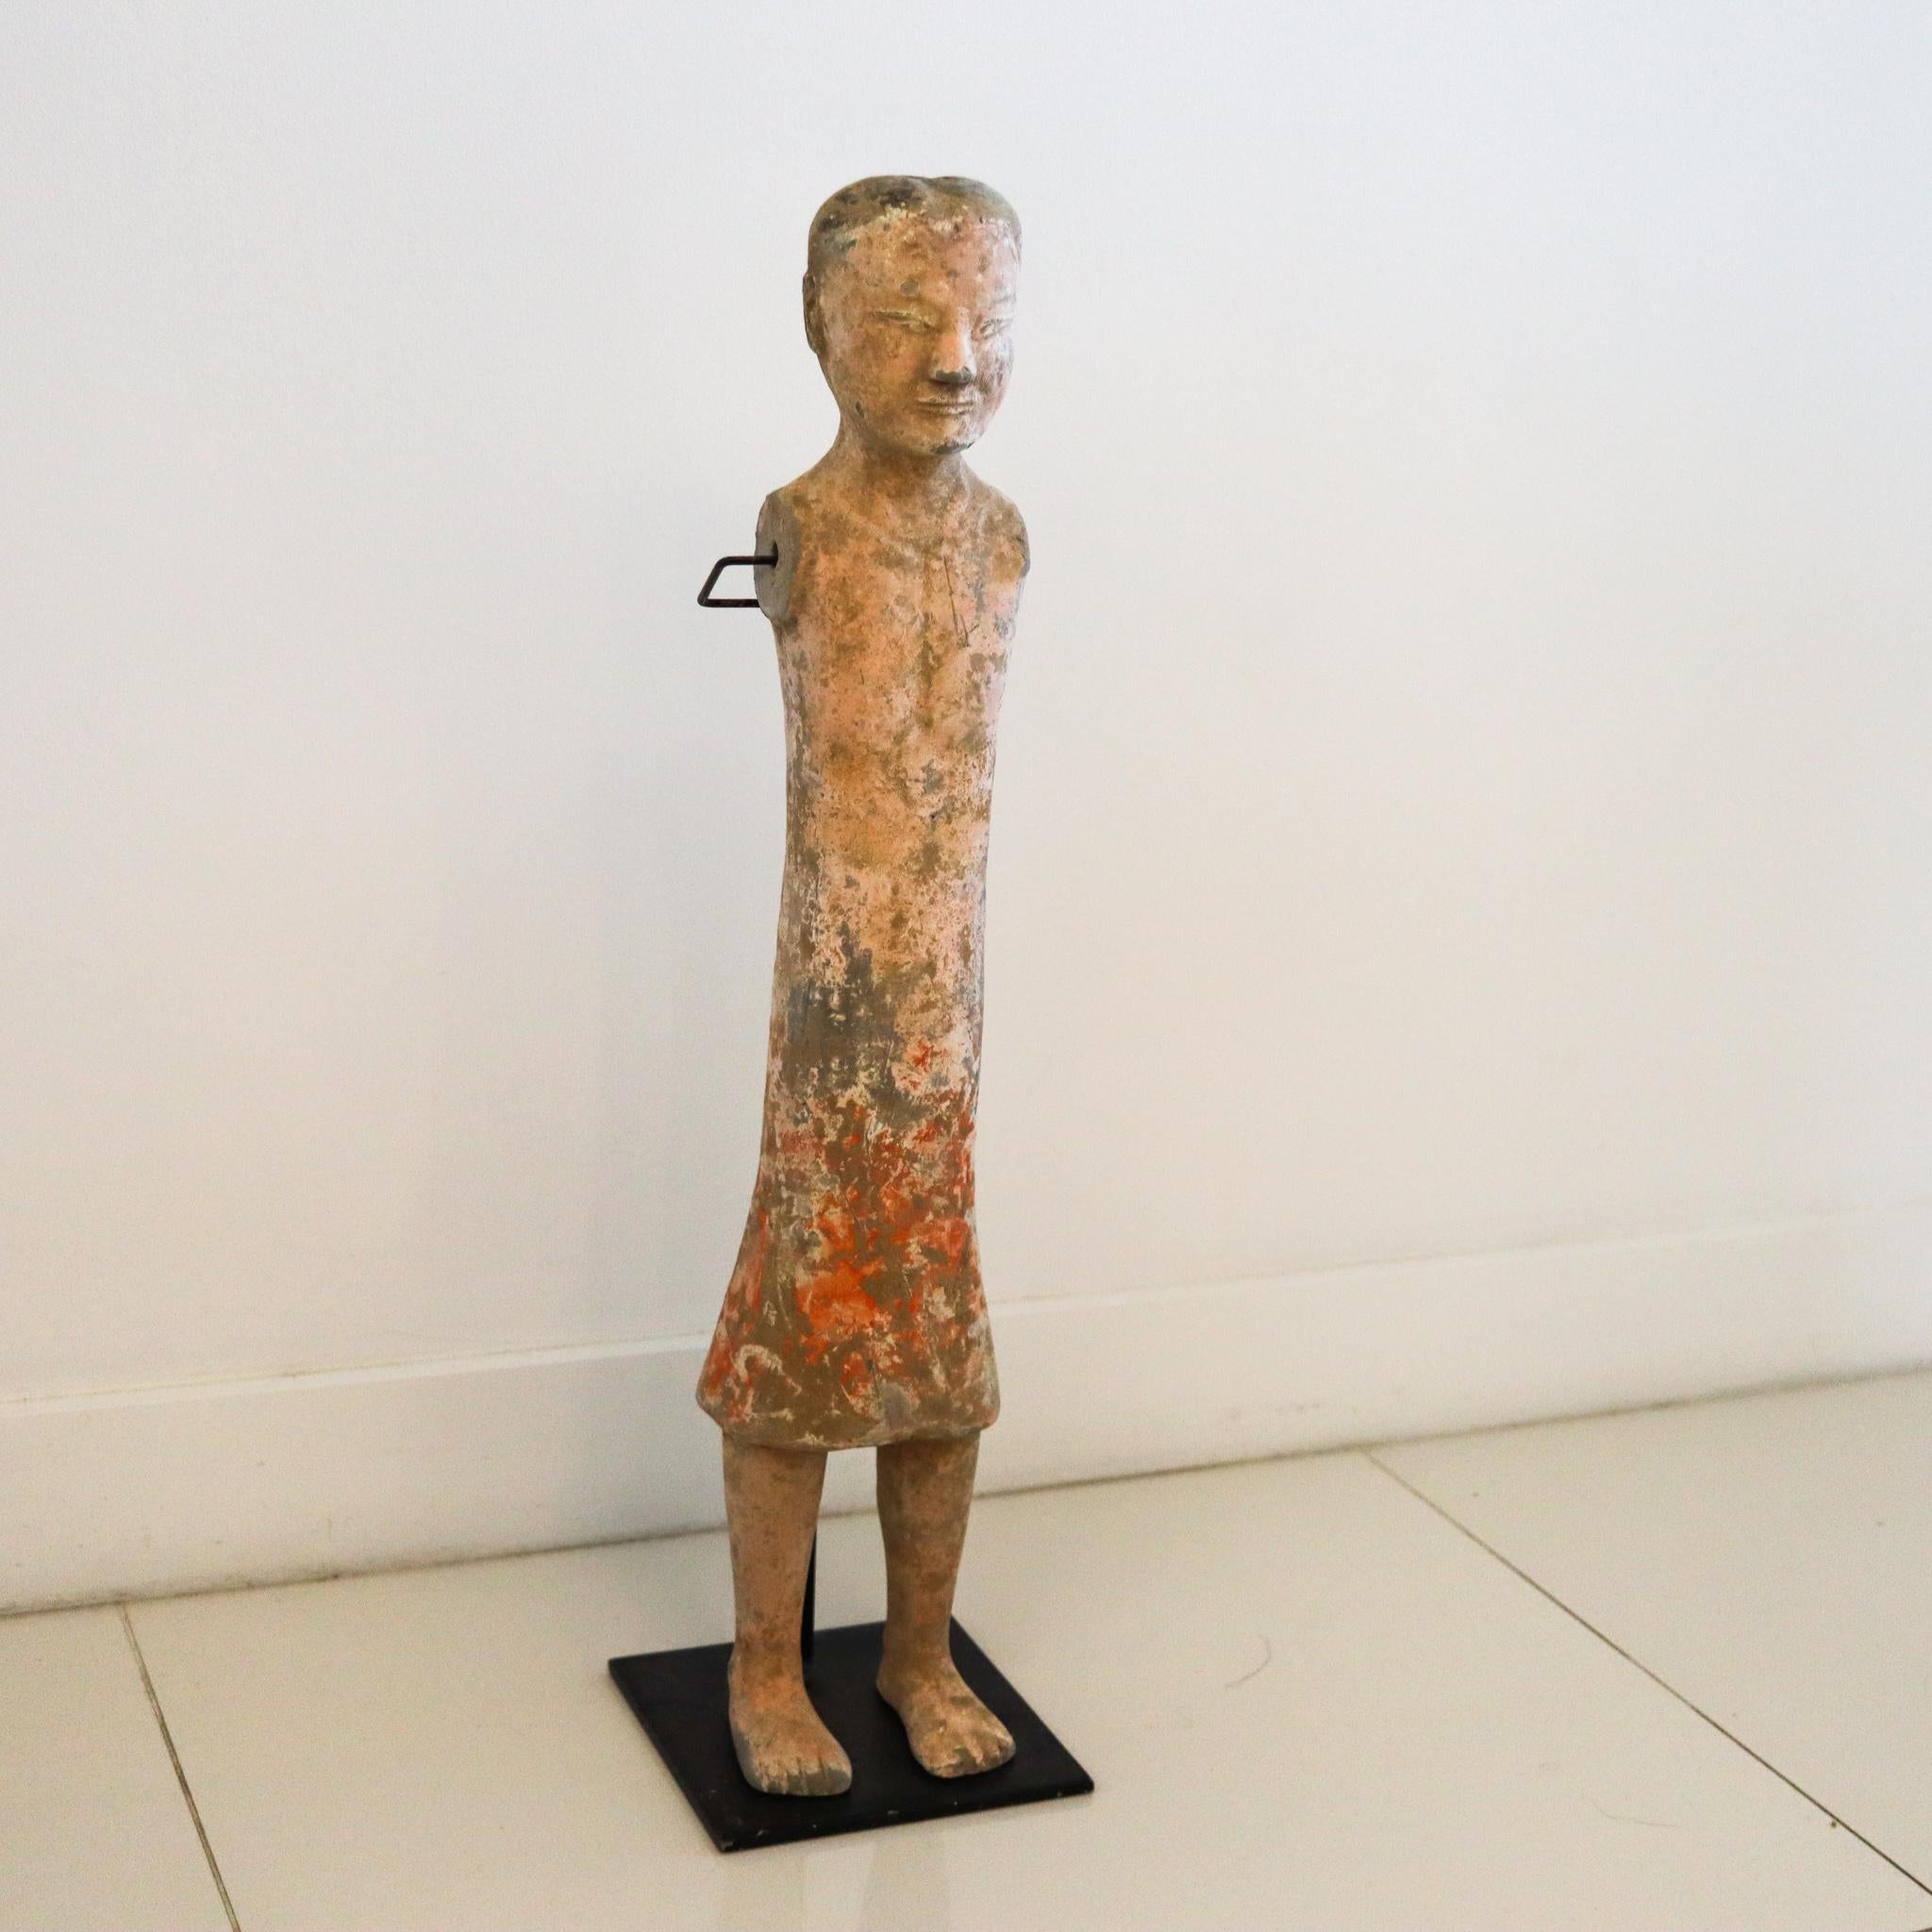 China 100 BC Han Dynasty Ancient Rare Stickman Sculpture in Earthenware Pottery In Excellent Condition For Sale In Miami, FL